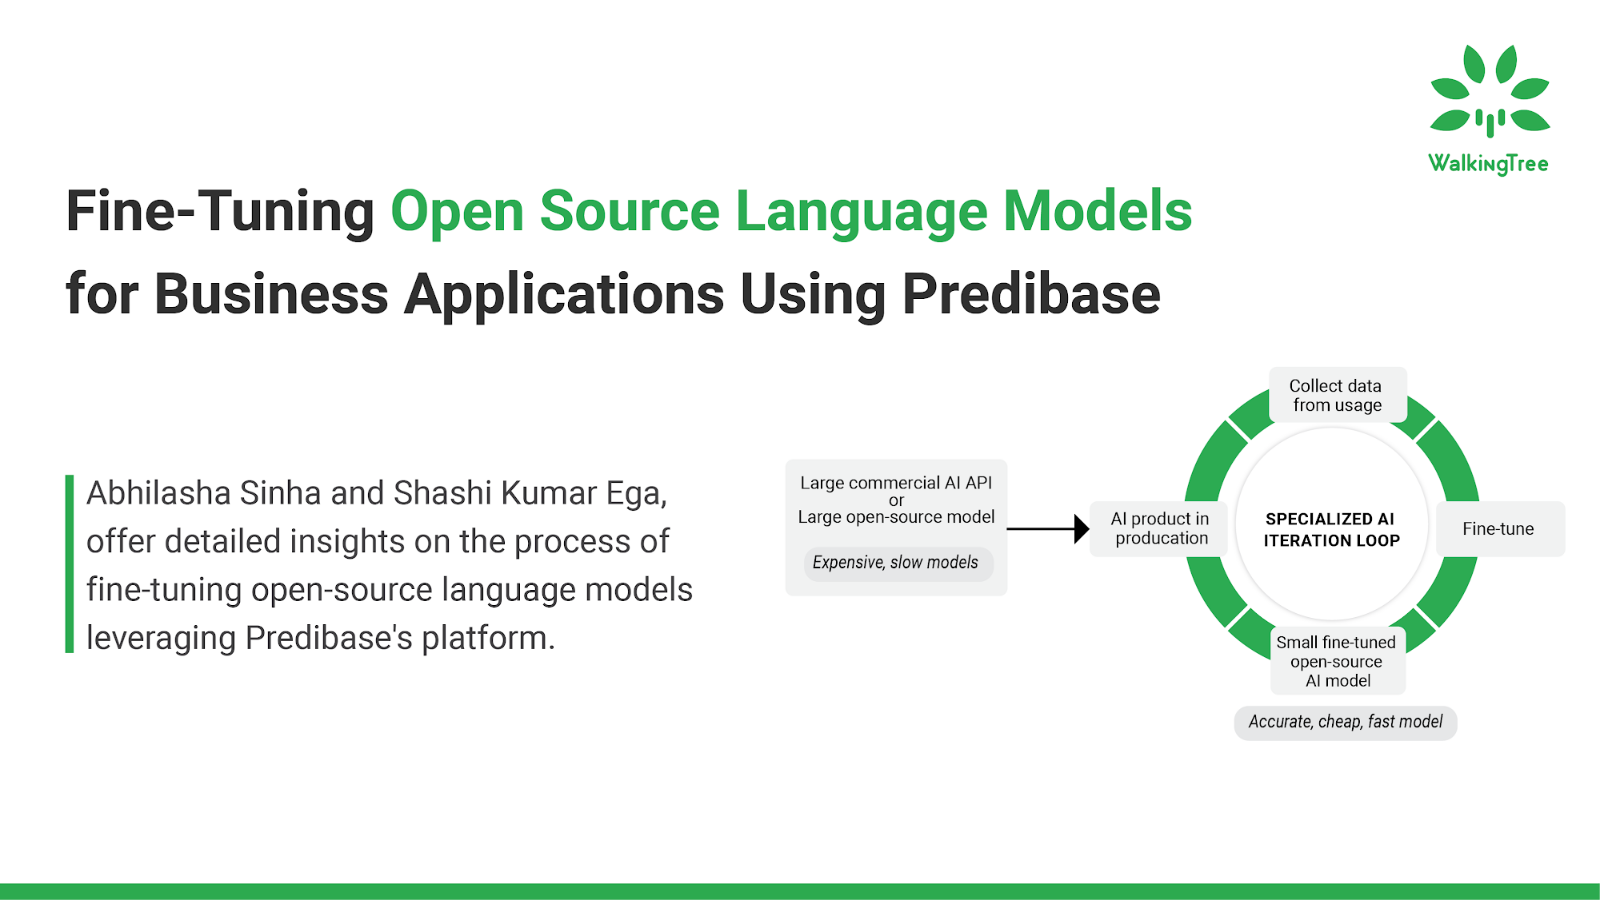 Fine-Tuning Open Source Language Models for Business Applications Using Predibase